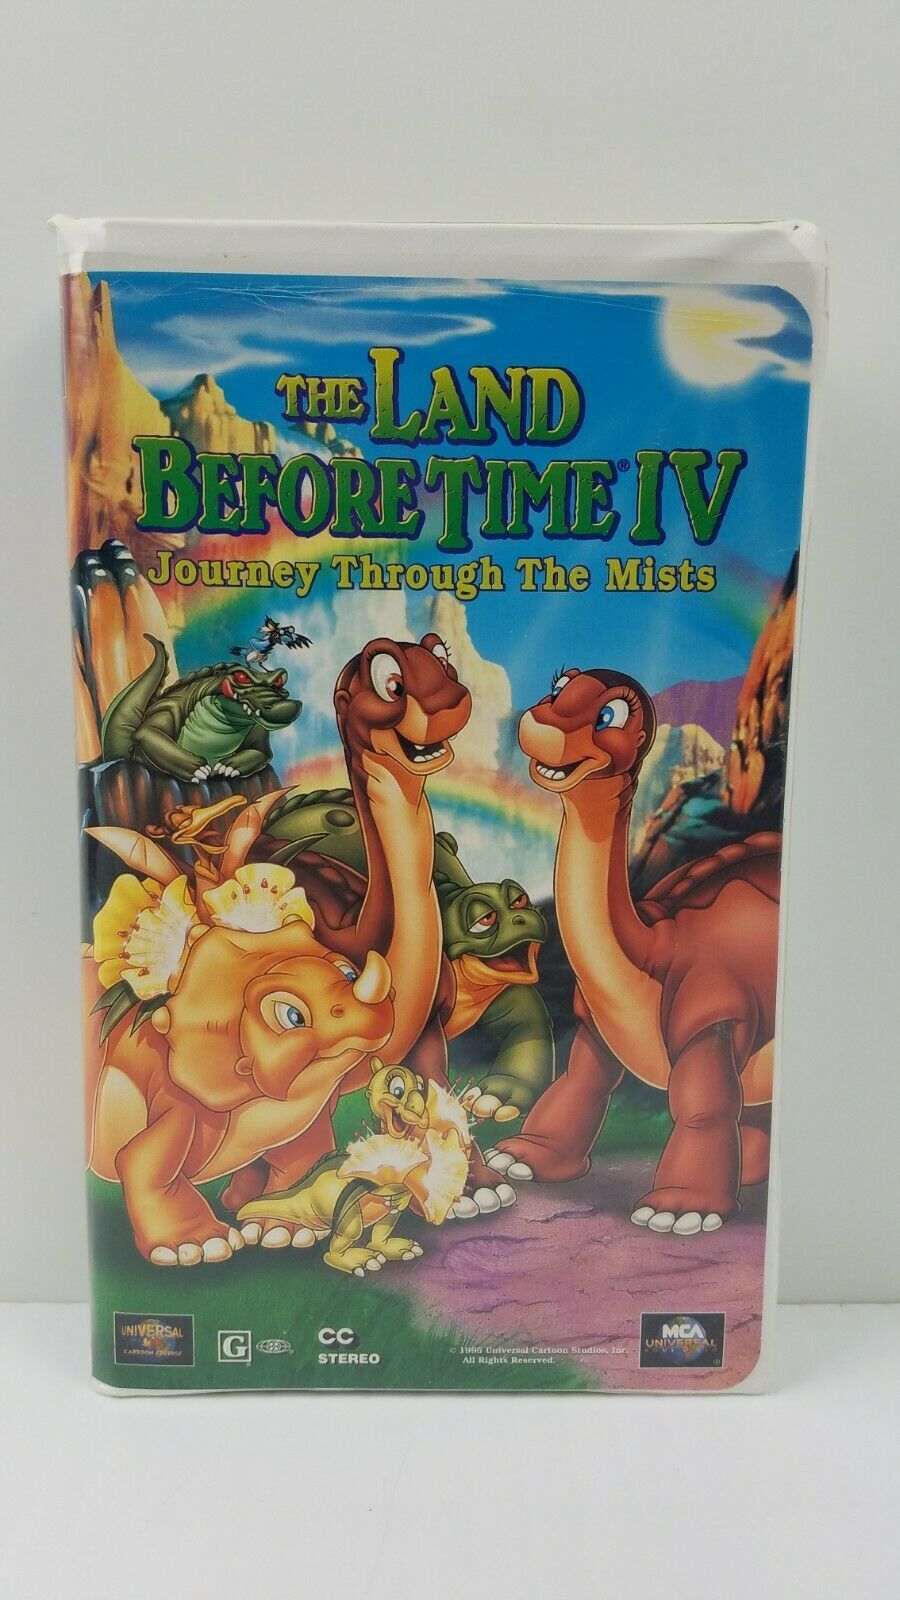 Primary image for The Land Before Time IV: Journey Through the Mists (VHS, 1996, Clamshell)